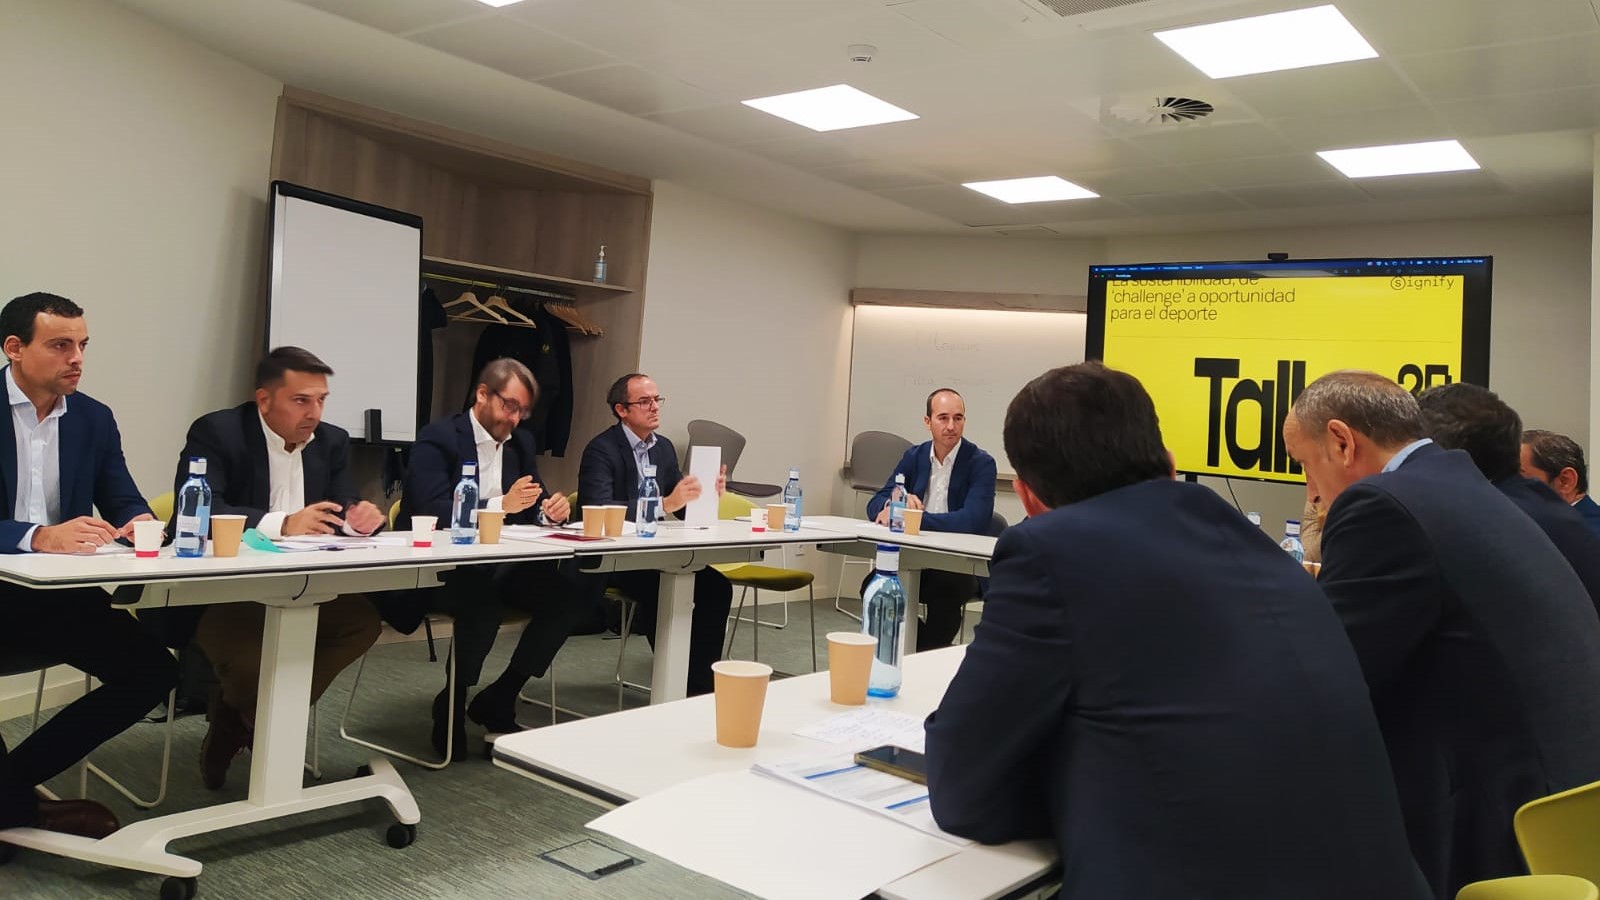 Forever Green has participated in the first edition of the 2Playbook Talks, organised by 2Playbook Talks and with the collaboration of Signify Spain.